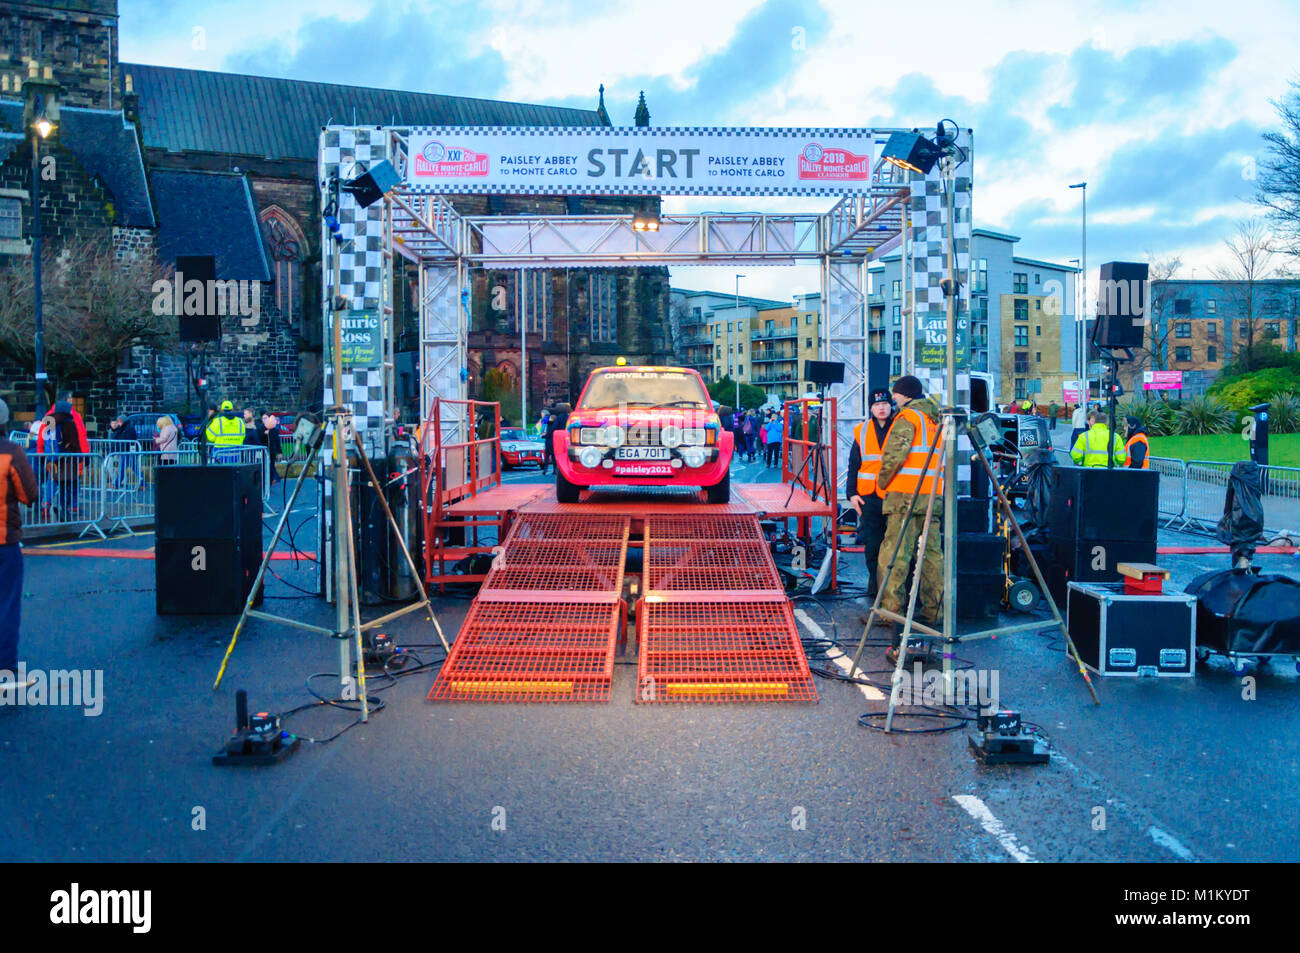 Paisley, Scotland, UK. 31st January 2018: The starting podium. The Monte Carlo Rally starts at Paisley Abbey. This year sees the 21st  Historique event and the 3rd Classique event. Both events are staged by the Automobile Club de Monaco  and take place on open public roads. The distance to Monte Carlo is 1270 miles. Credit: Skully/Alamy Live News Stock Photo